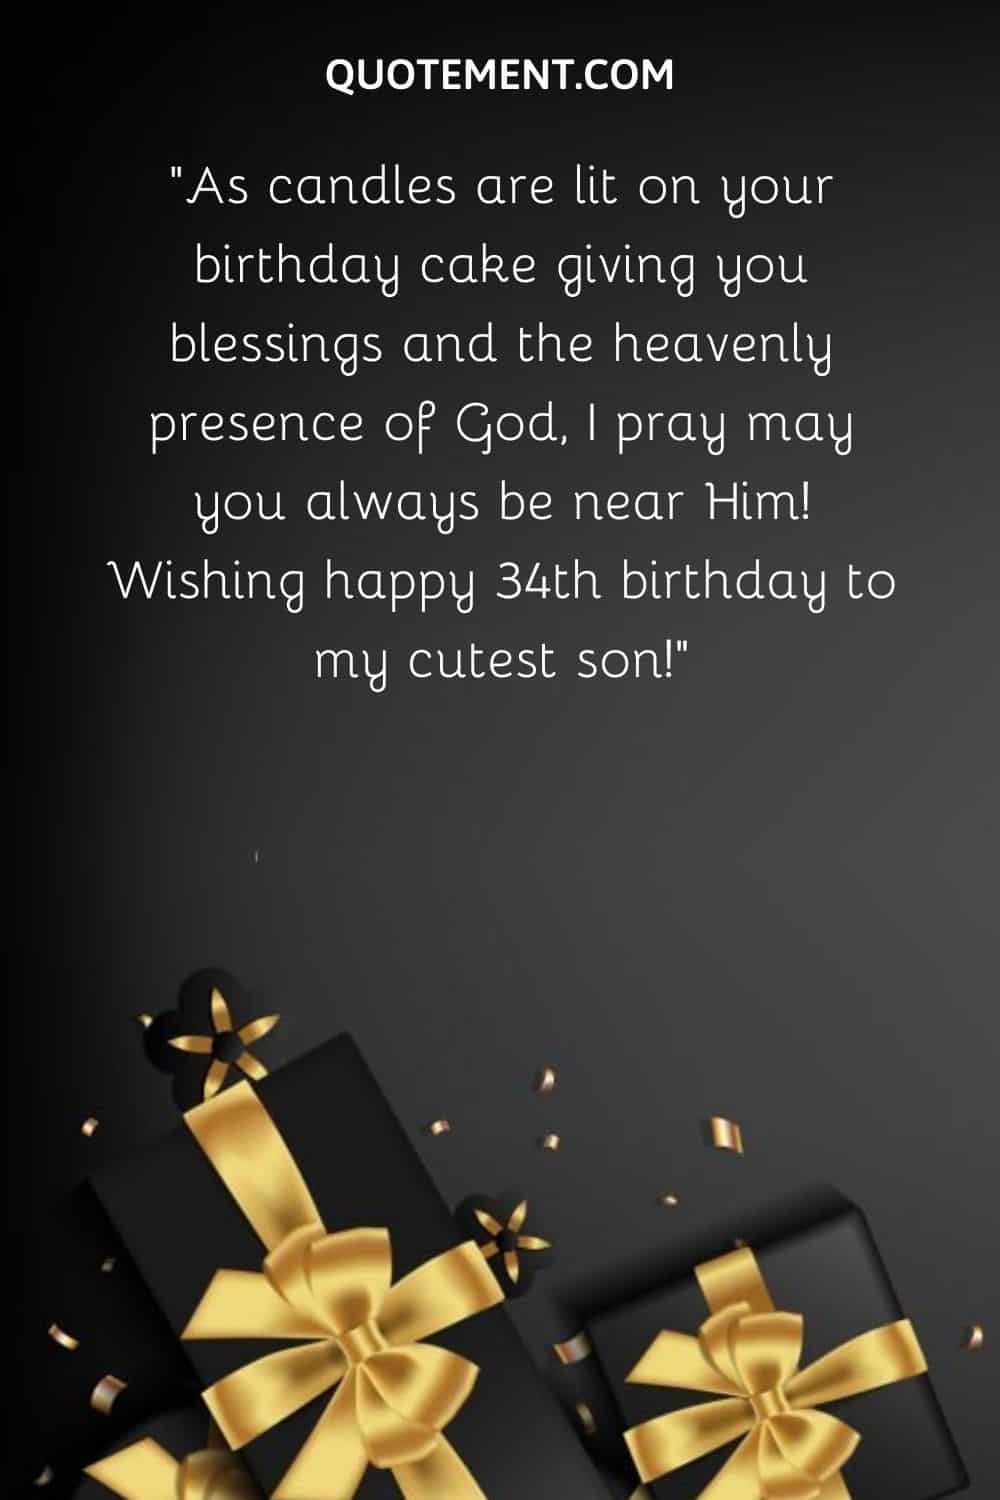 “As candles are lit on your birthday cake giving you blessings and the heavenly presence of God,